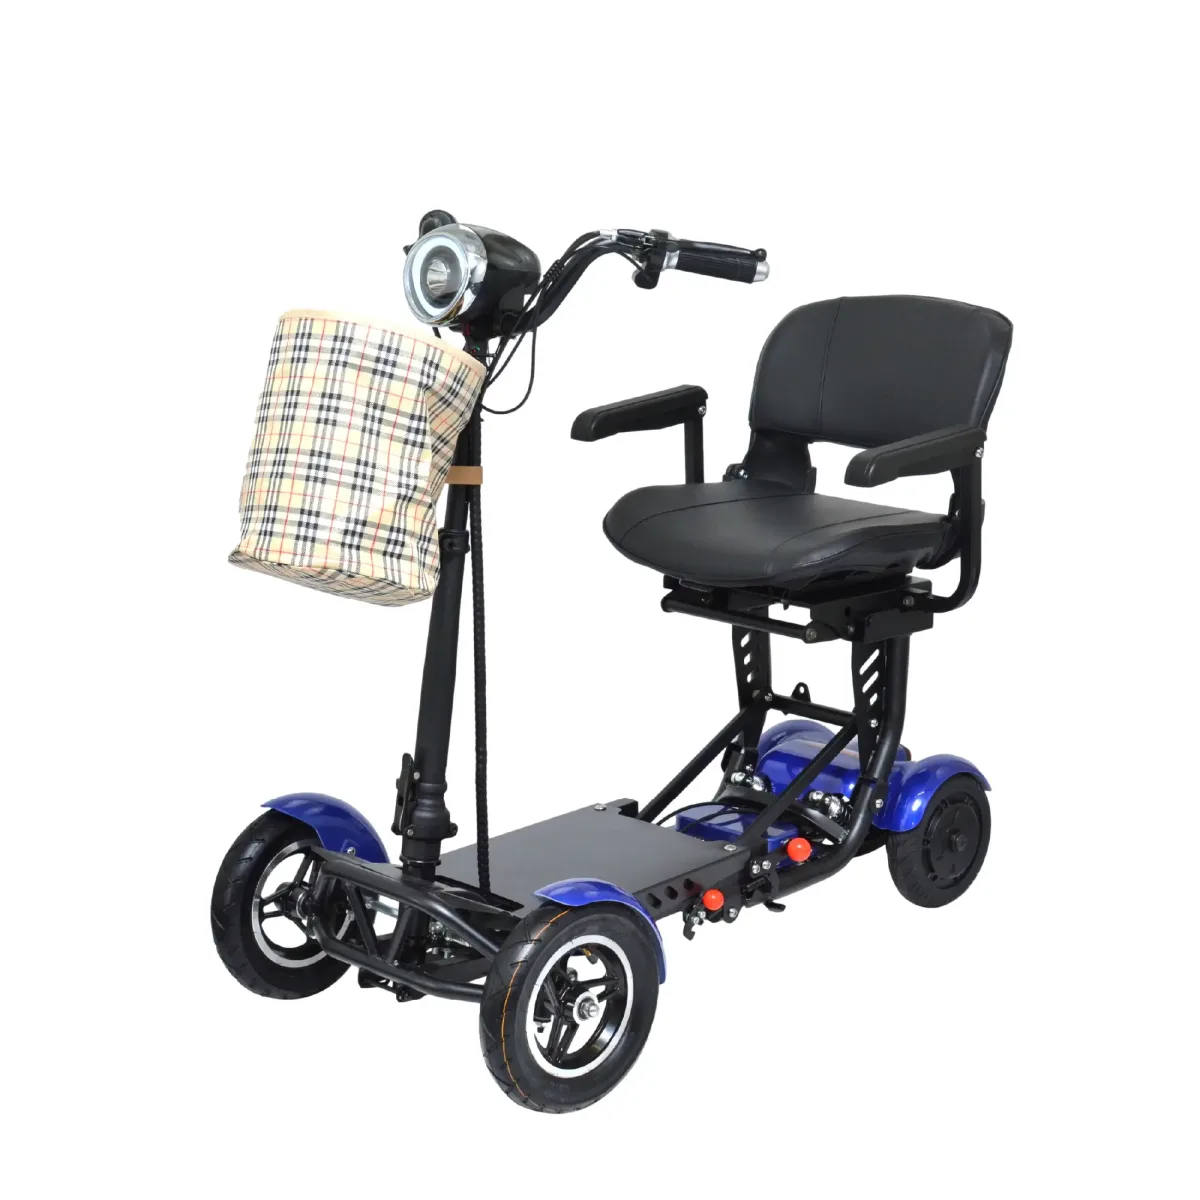 MS-3000 Foldable Mobility Scooter 300-400 lbs 3